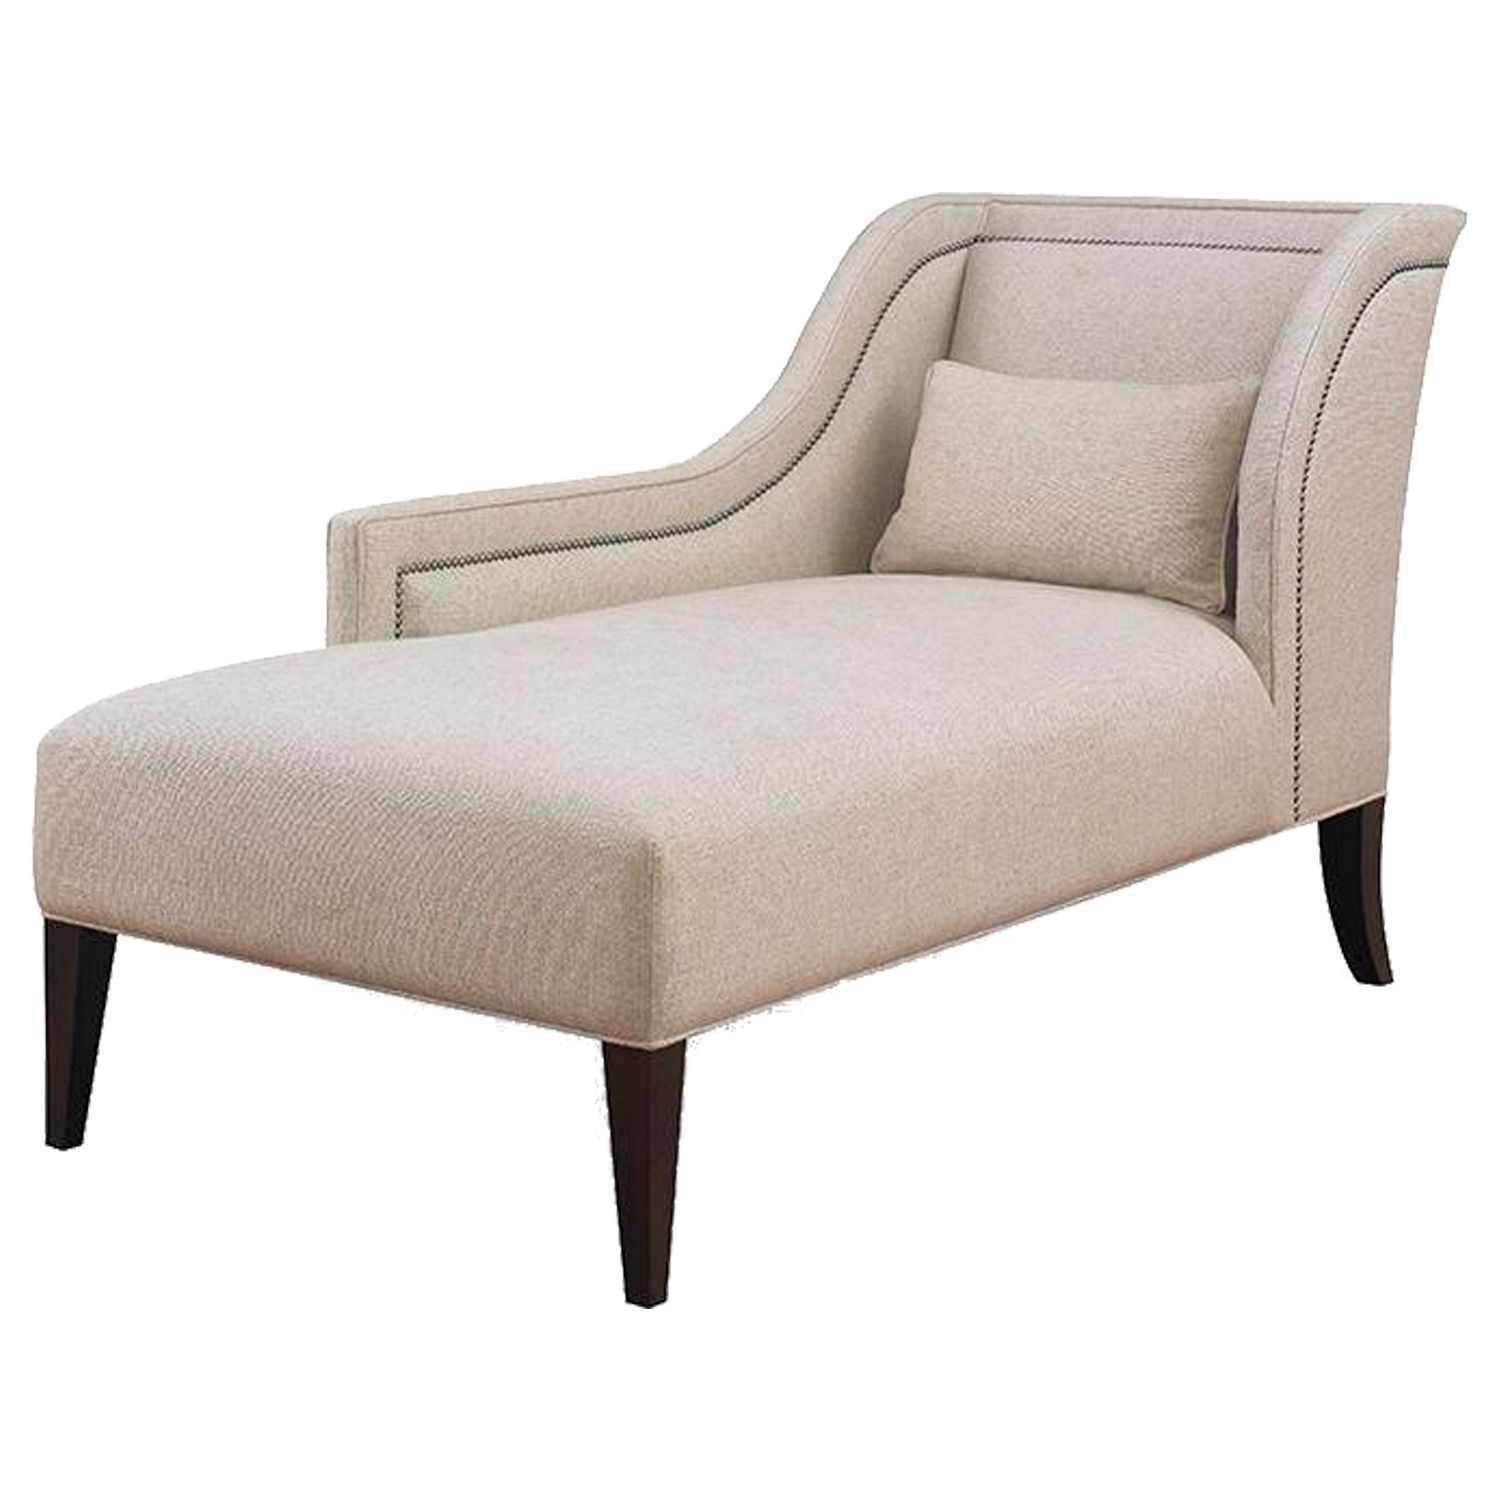 Mid Century Modern Chaise Lounges Within Widely Used Buy Pasadena One Arm Chaisekravet – Made To Order Designer (View 11 of 15)